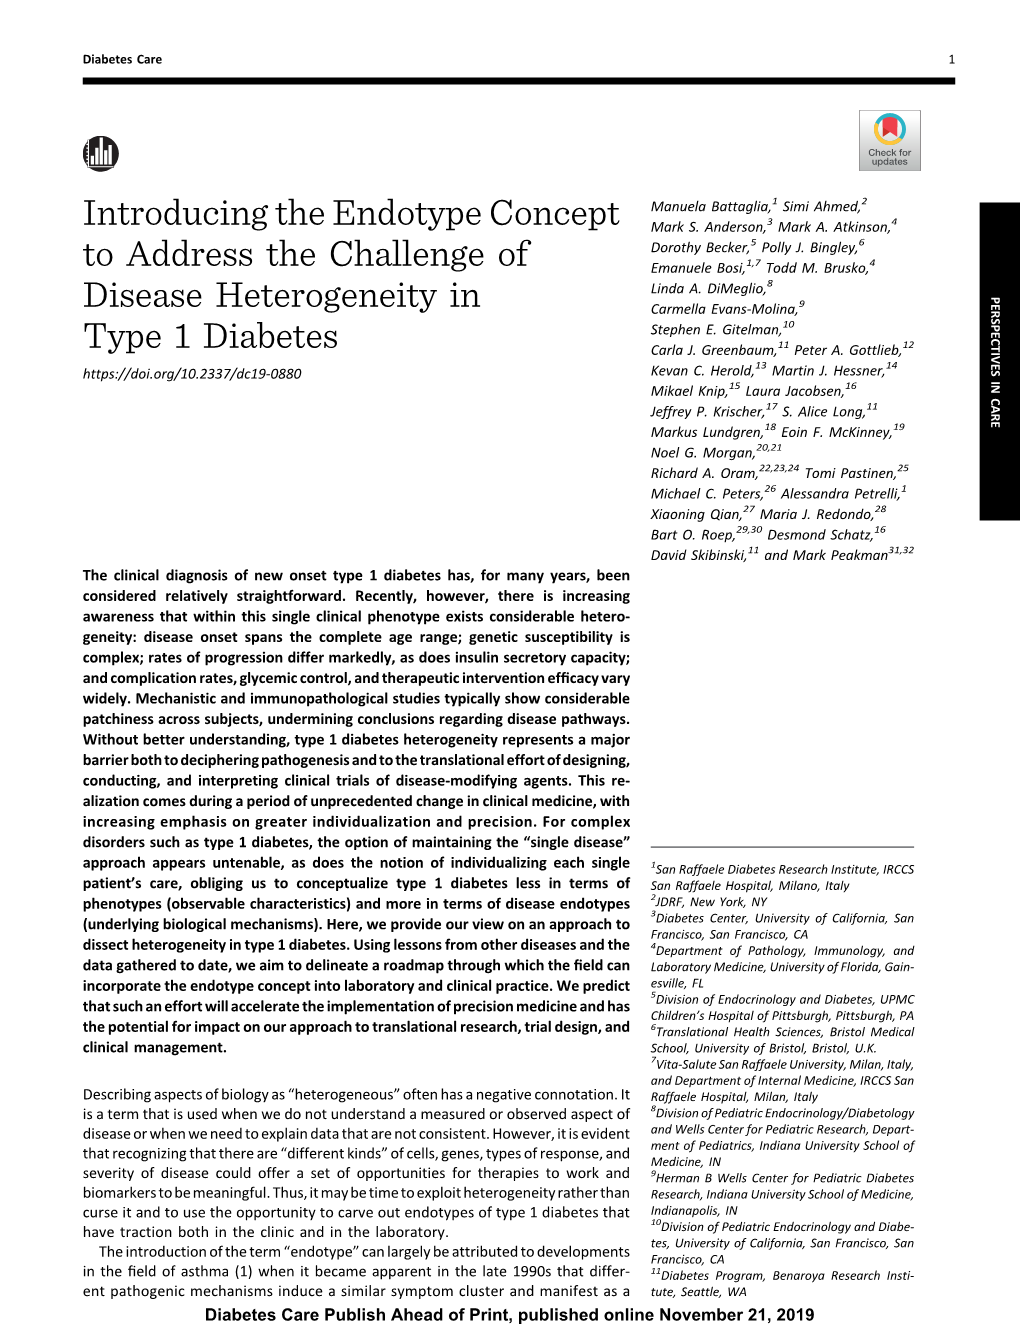 Introducing the Endotype Concept to Address the Challenge of Disease